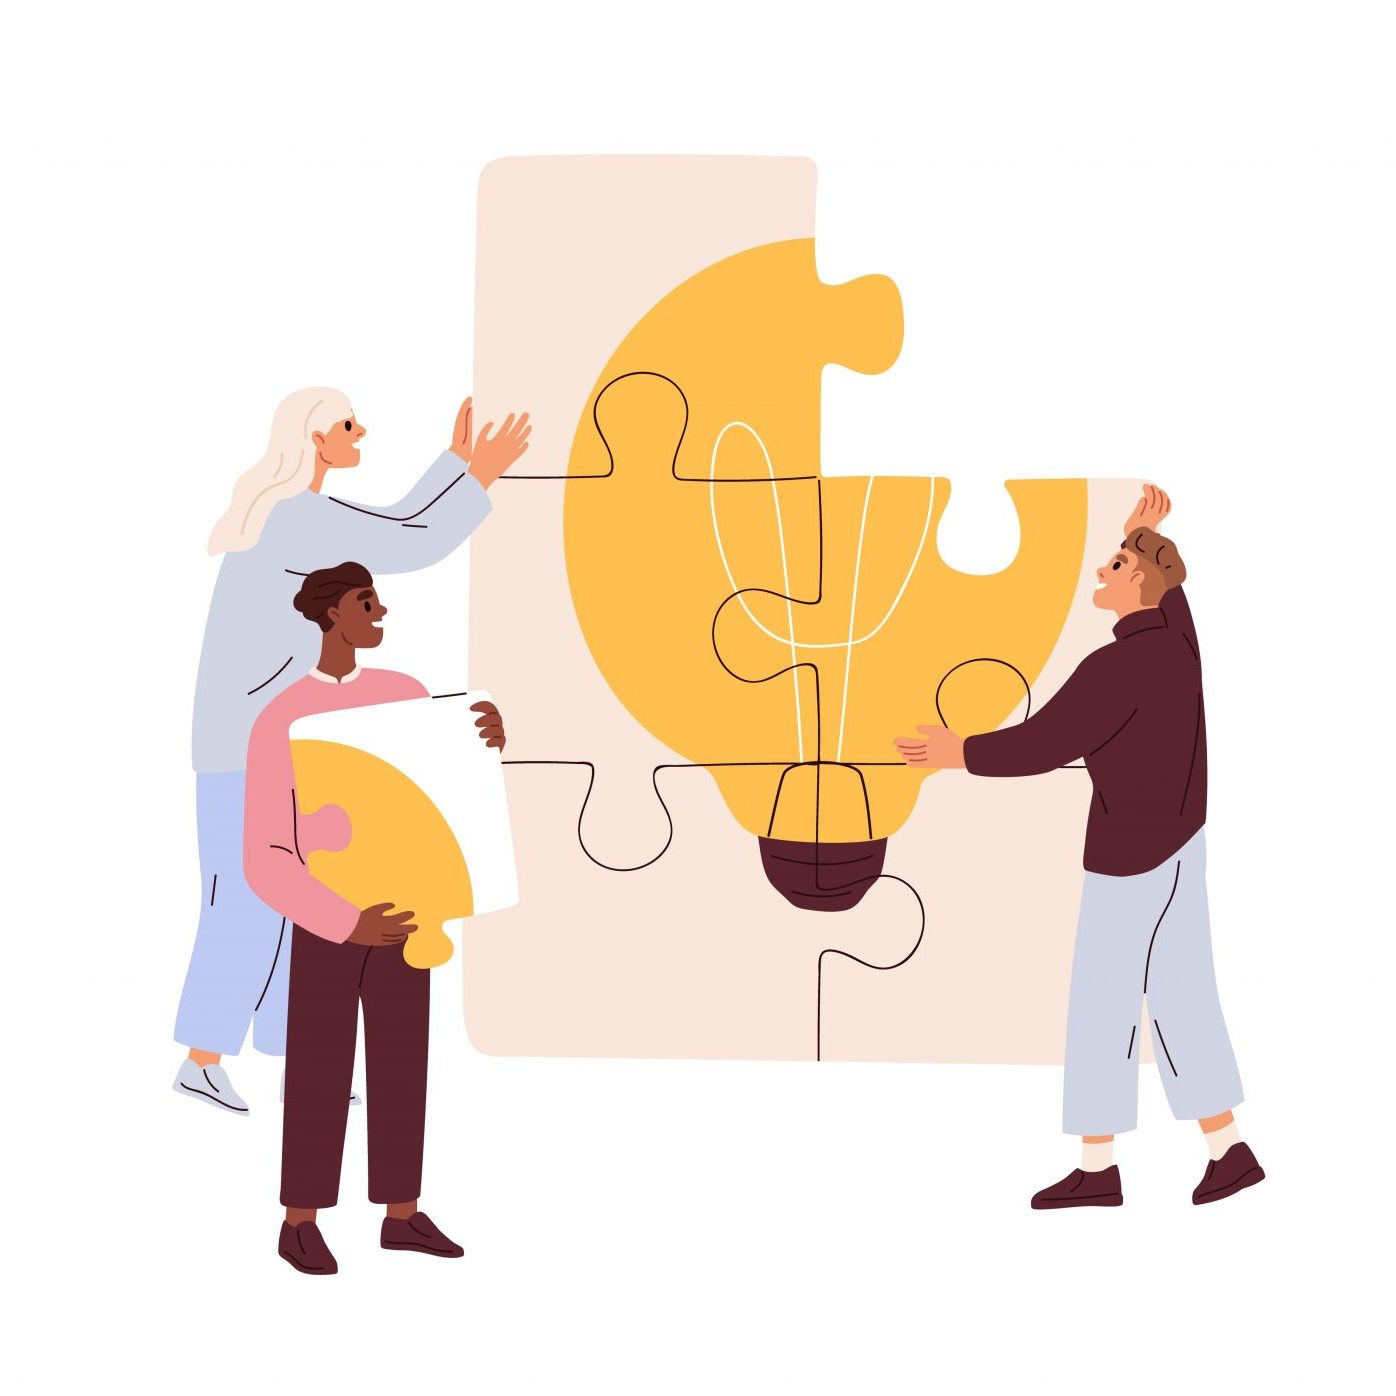 Colourful illustration on white background of group of people working on puzzle that makes a lightbulb.